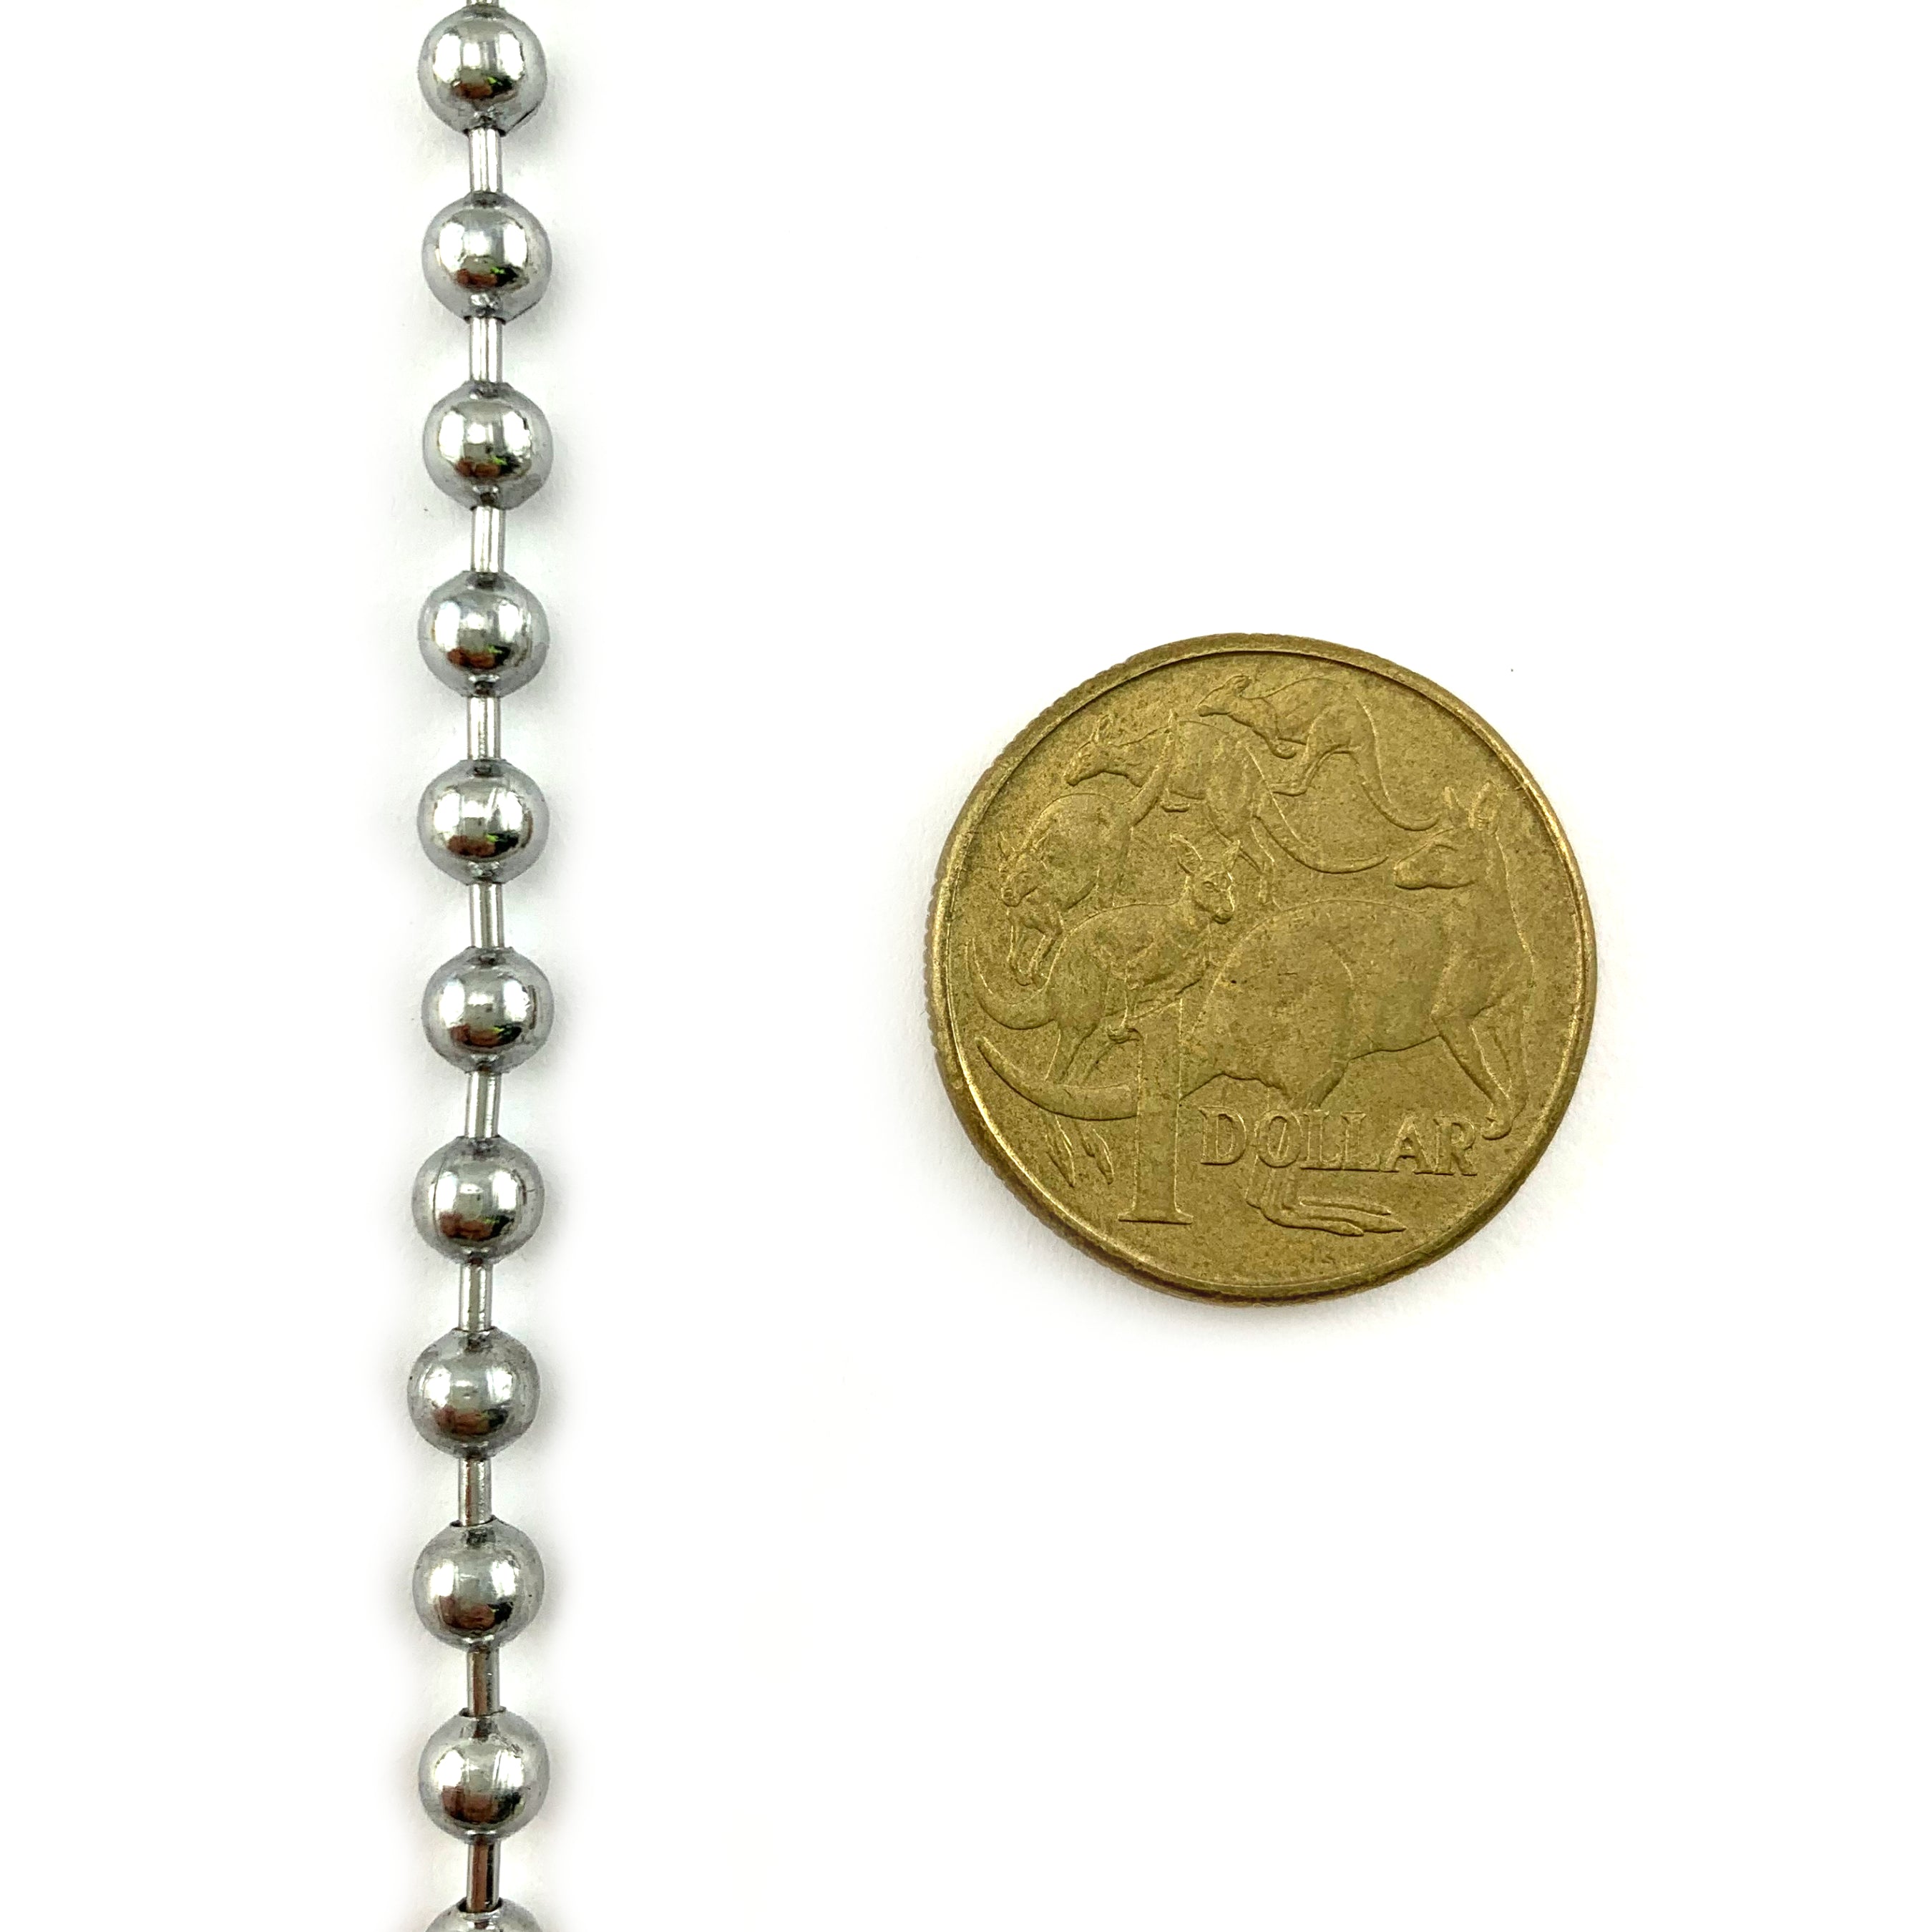 Ball Chain in Chrome size 4.5mm. From 1 metre. Melbourne Australia